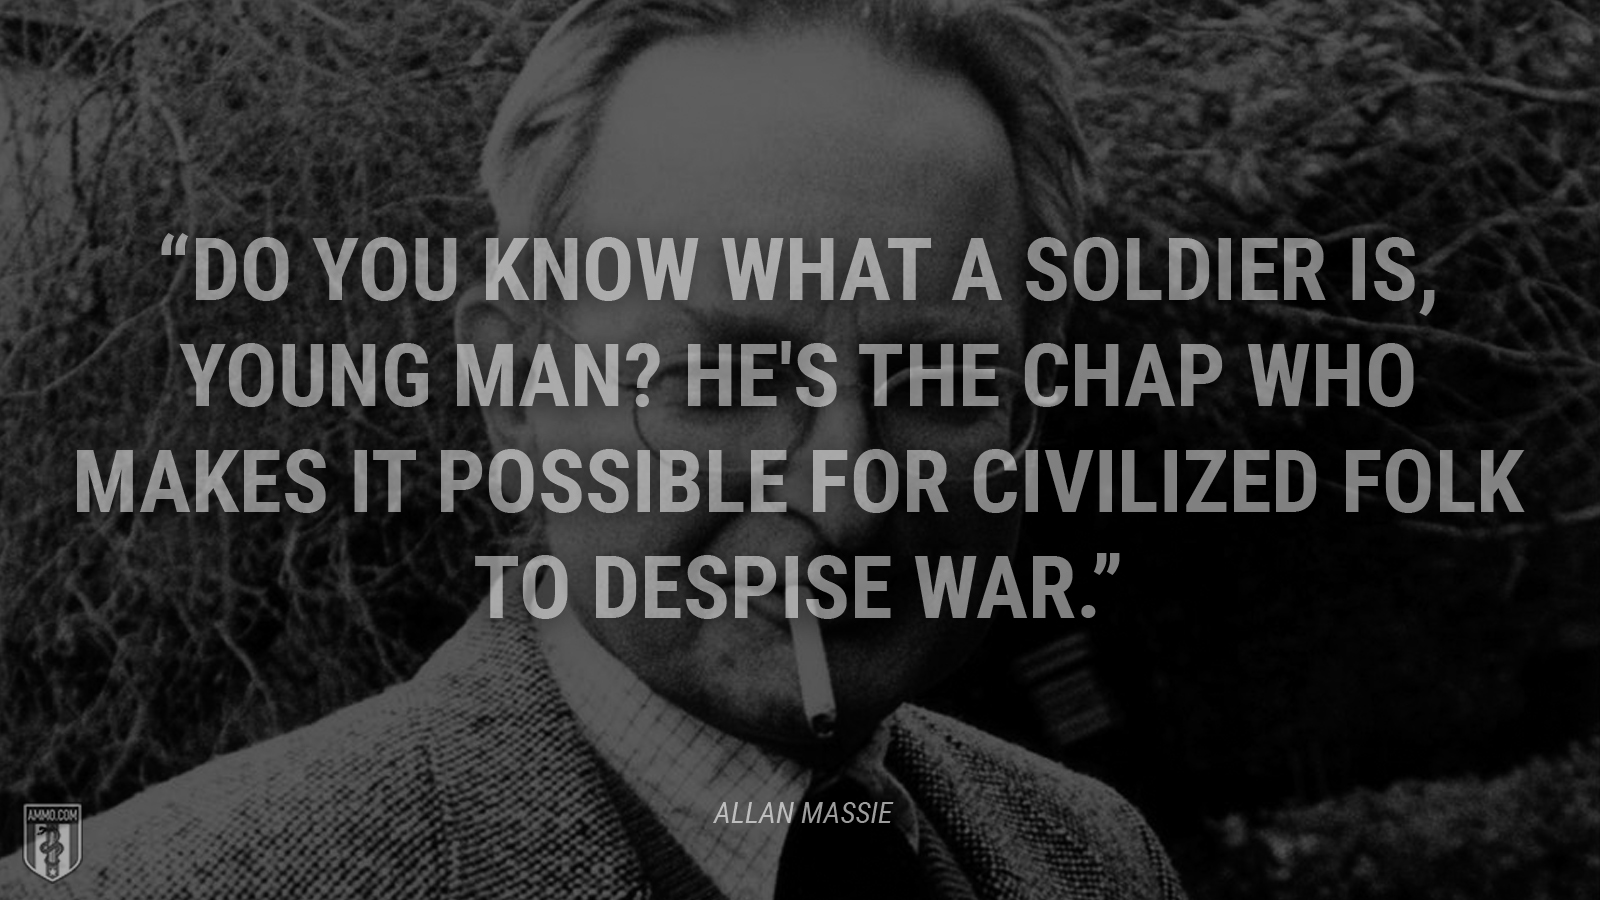 “Do you know what a soldier is, young man? He's the chap who makes it possible for civilized folk to despise war.” - Allan Massie